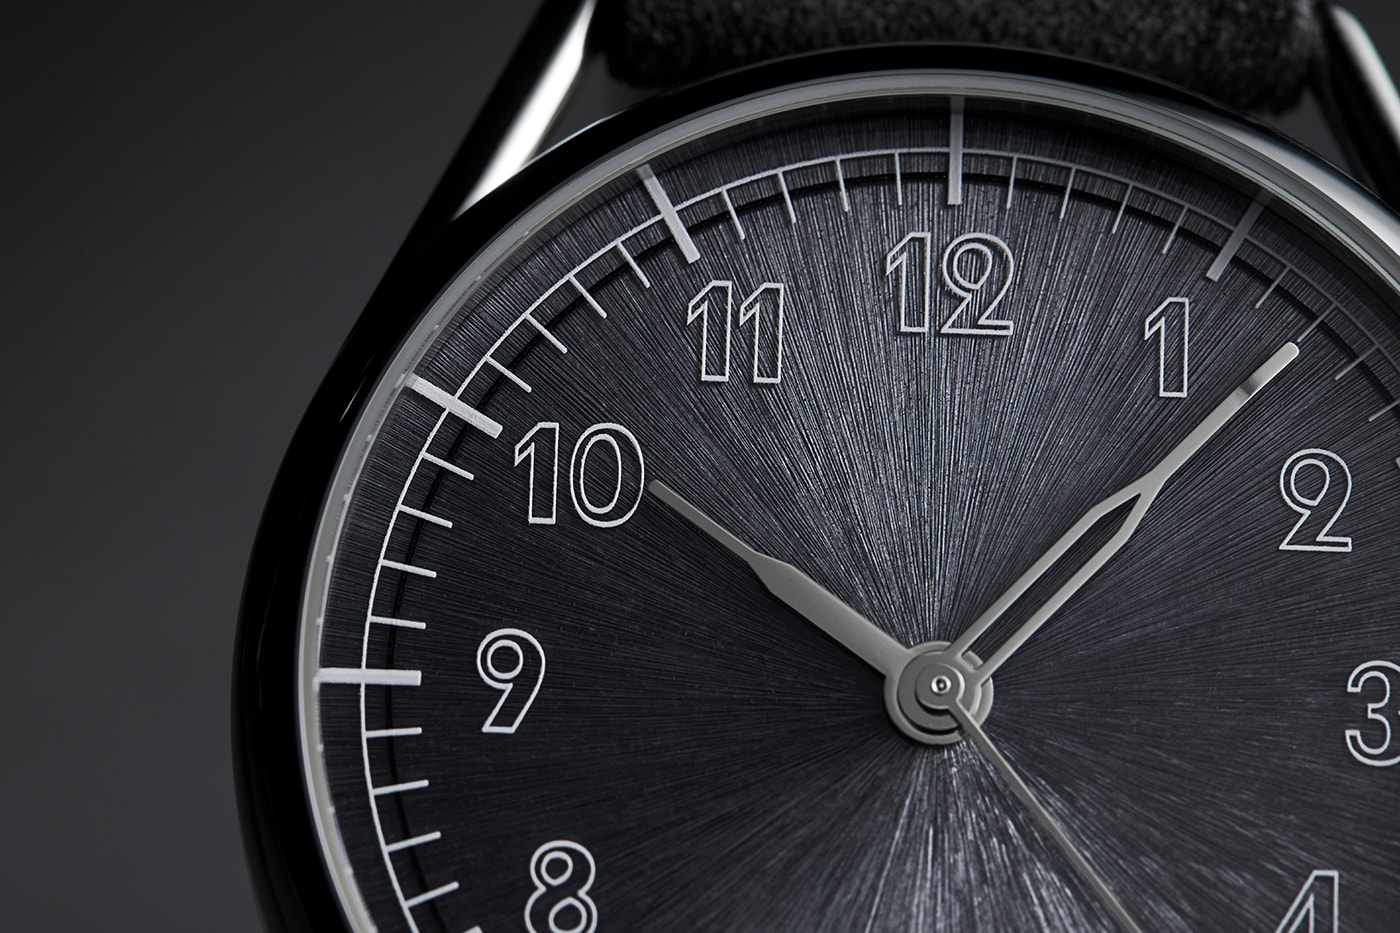 Hodinkee Releases Limited Edition anOrdain Model 3 enamel dials mechanical watches vintage compass needles